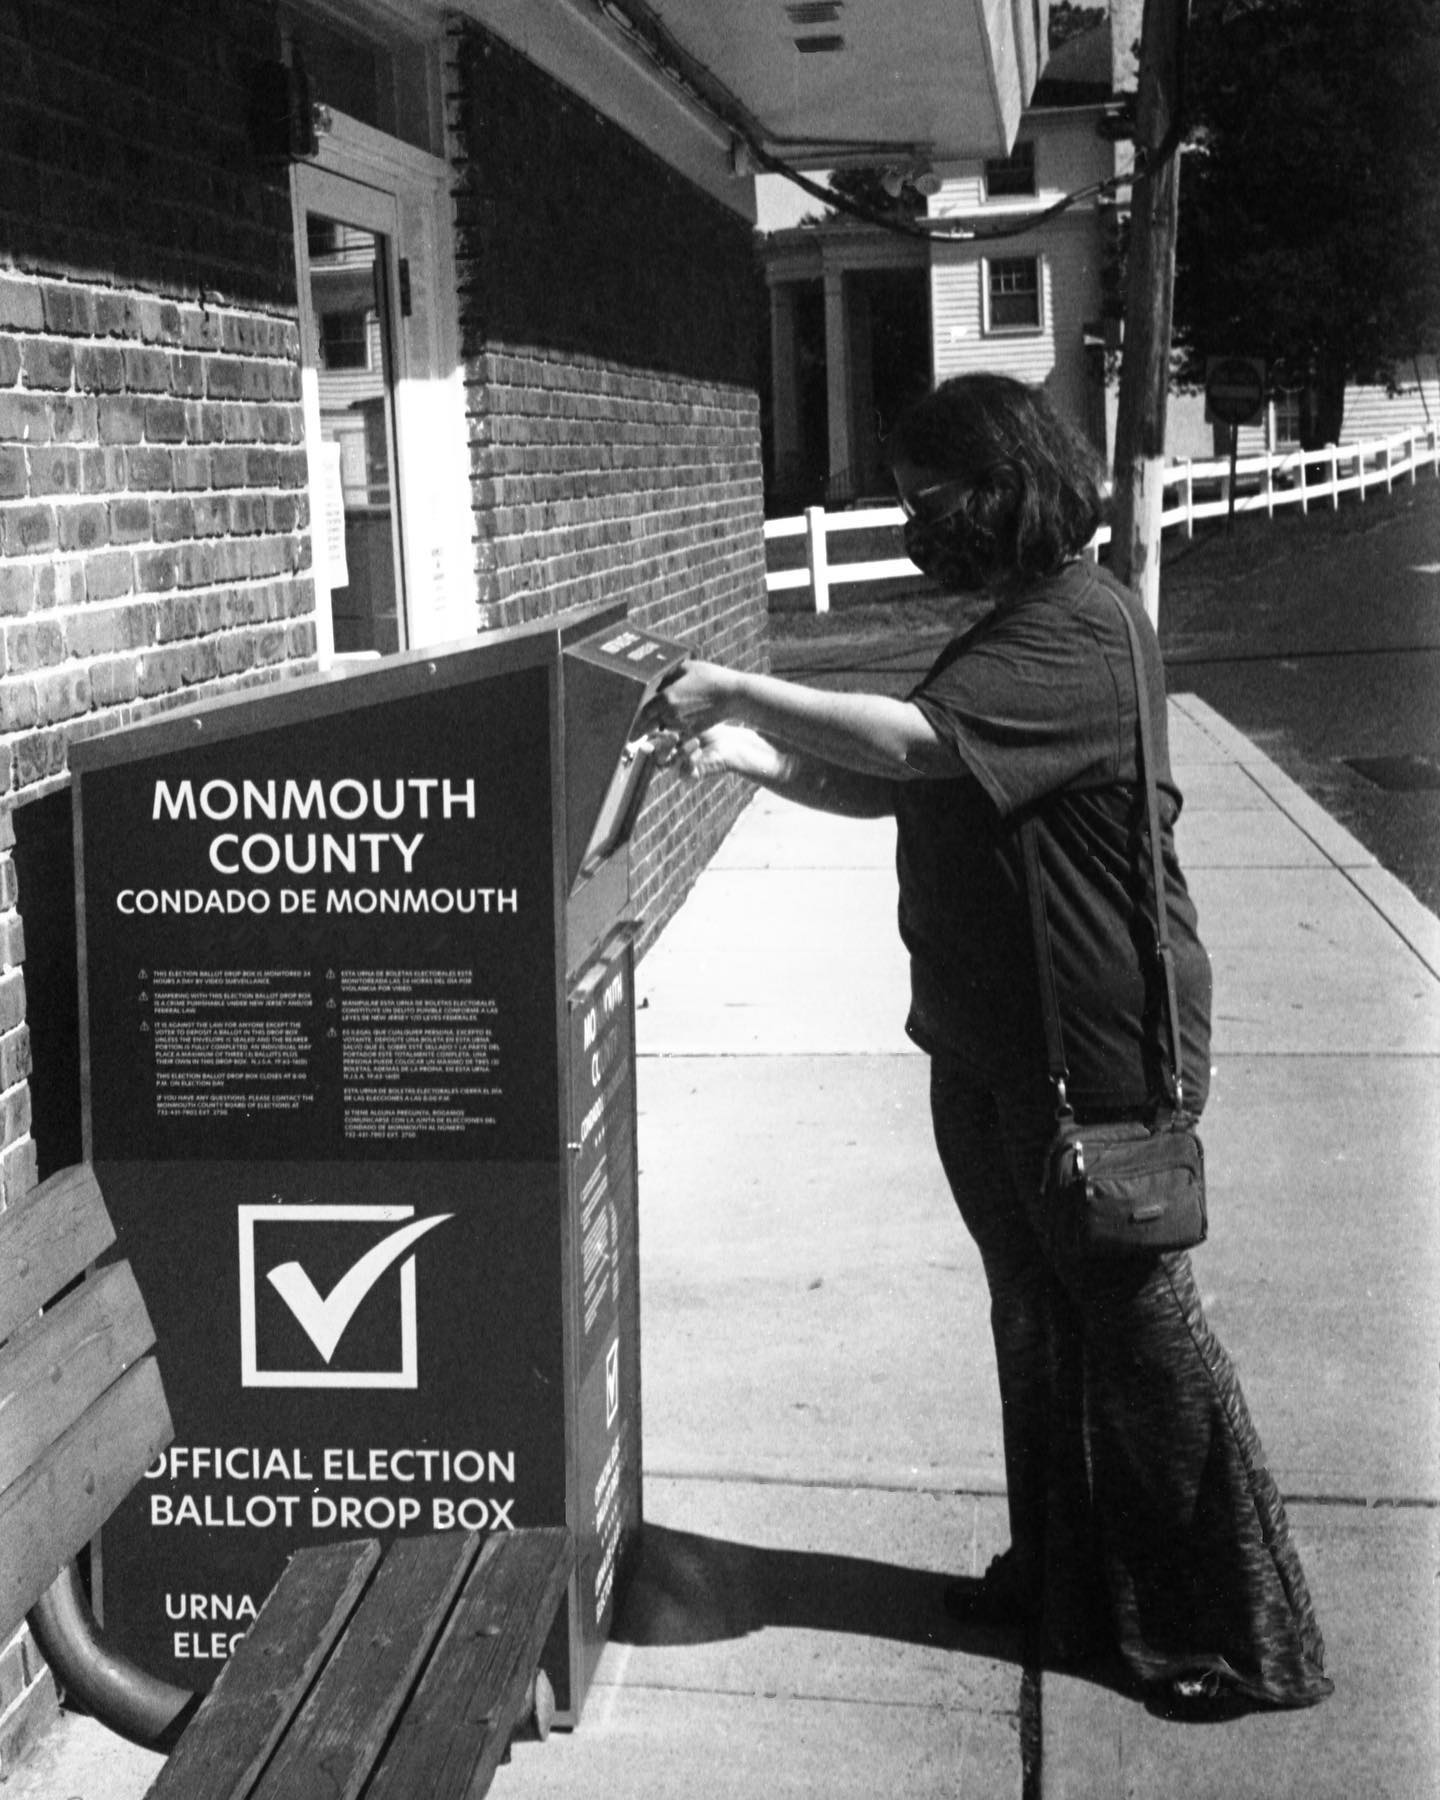 Laura voting about four weeks ago. Shot on Plus-X with my Contax III. Thanks, @govmurphy for making it so easy to vote during the pandemic. We should move to #handmarkedpaperballots for every election from here on out. #film #filmphotography #allthroughalenspodcast #election2020 #vote